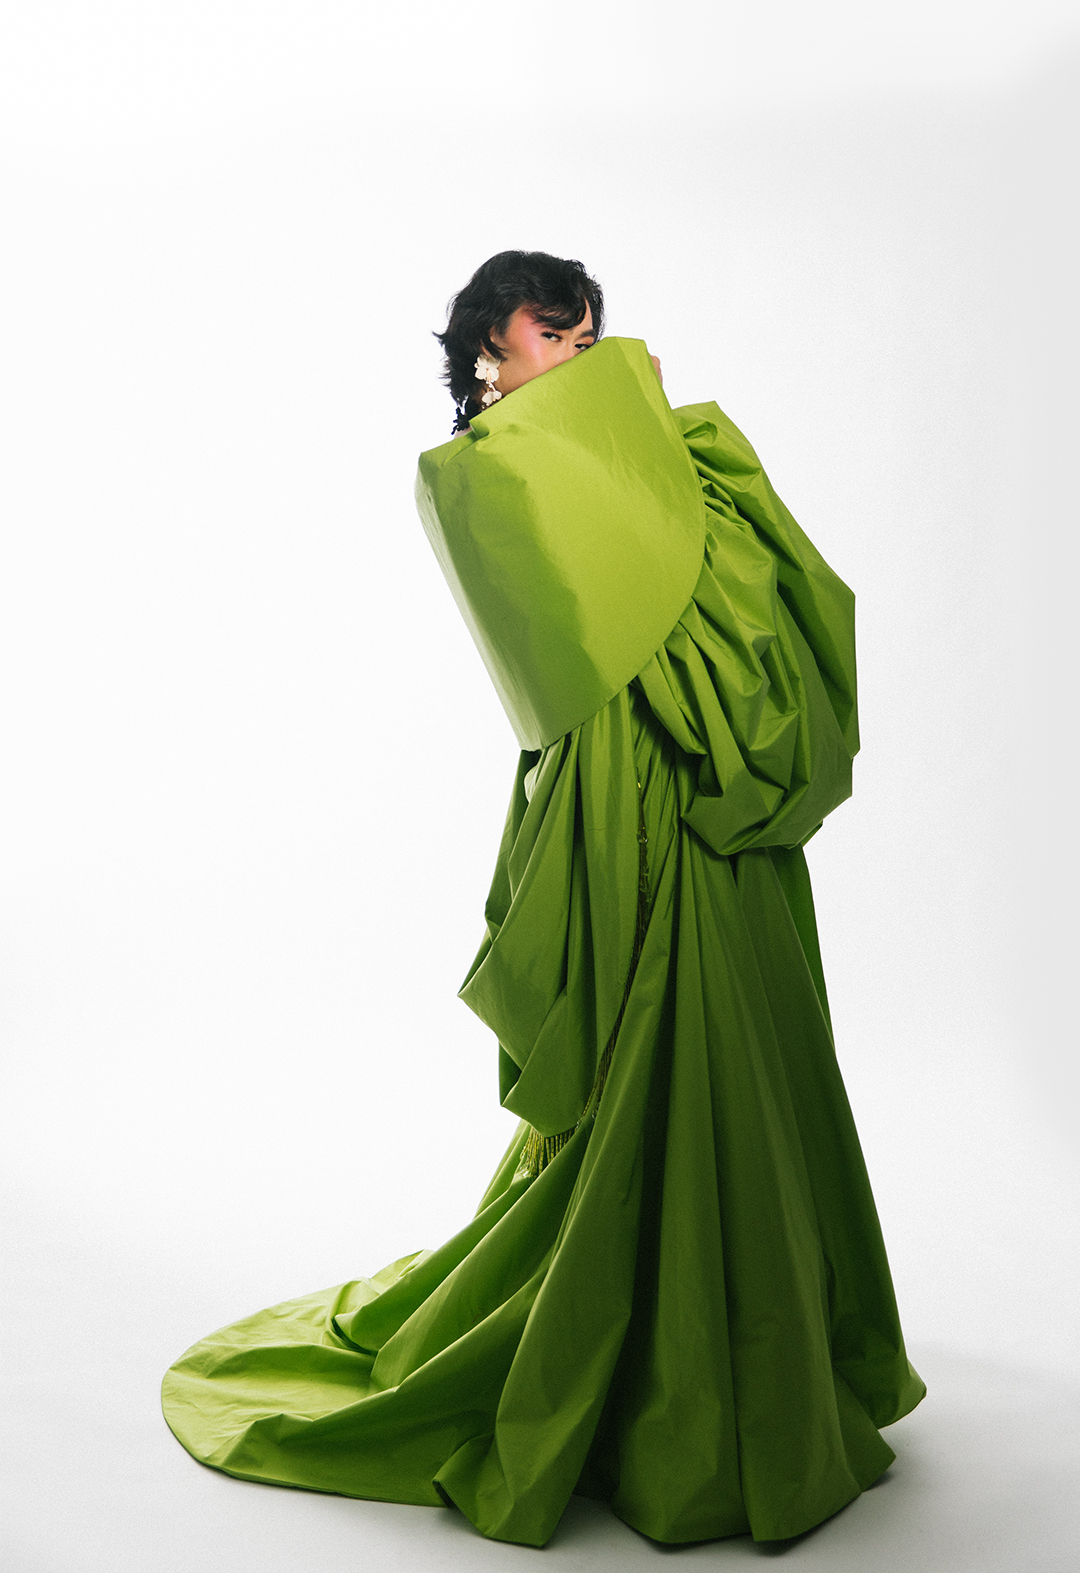 The model is wearing an opera coat that is made of a spring-green taffeta. This photo highlights the back/side view of the coat, showing the collar inspired by the barot saya and a cowl with color-matched, crystal fringe trim.